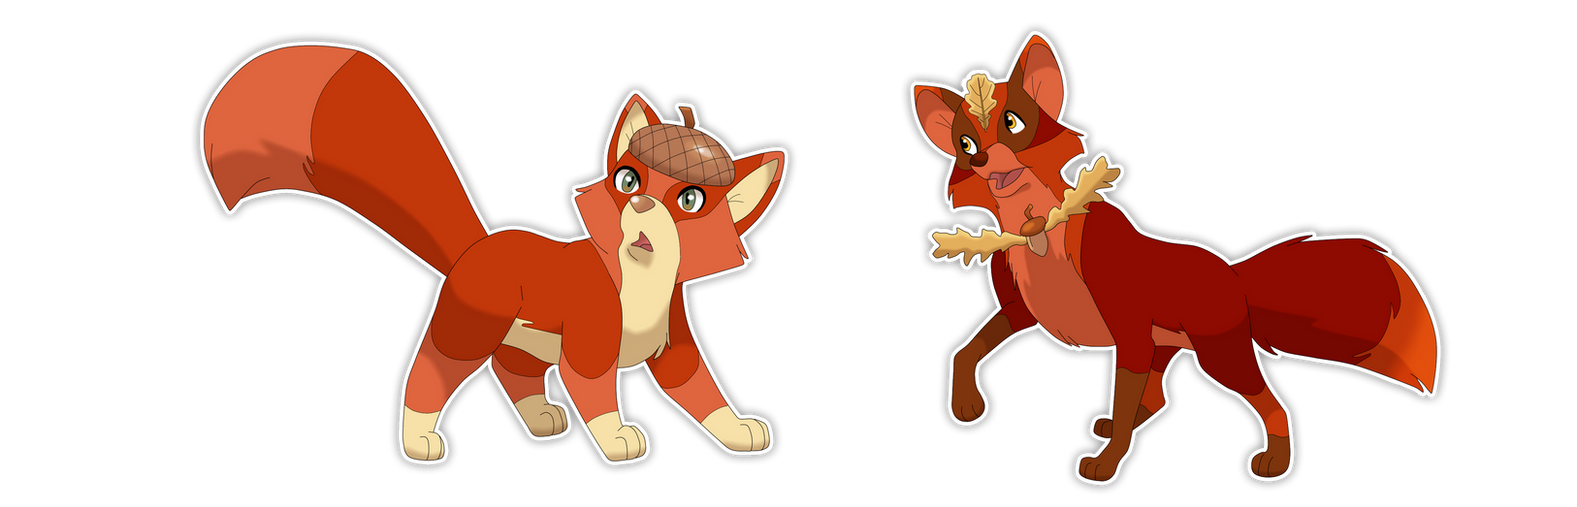 What If Tod Was A Pokemon By Reikimura10 On Deviantart